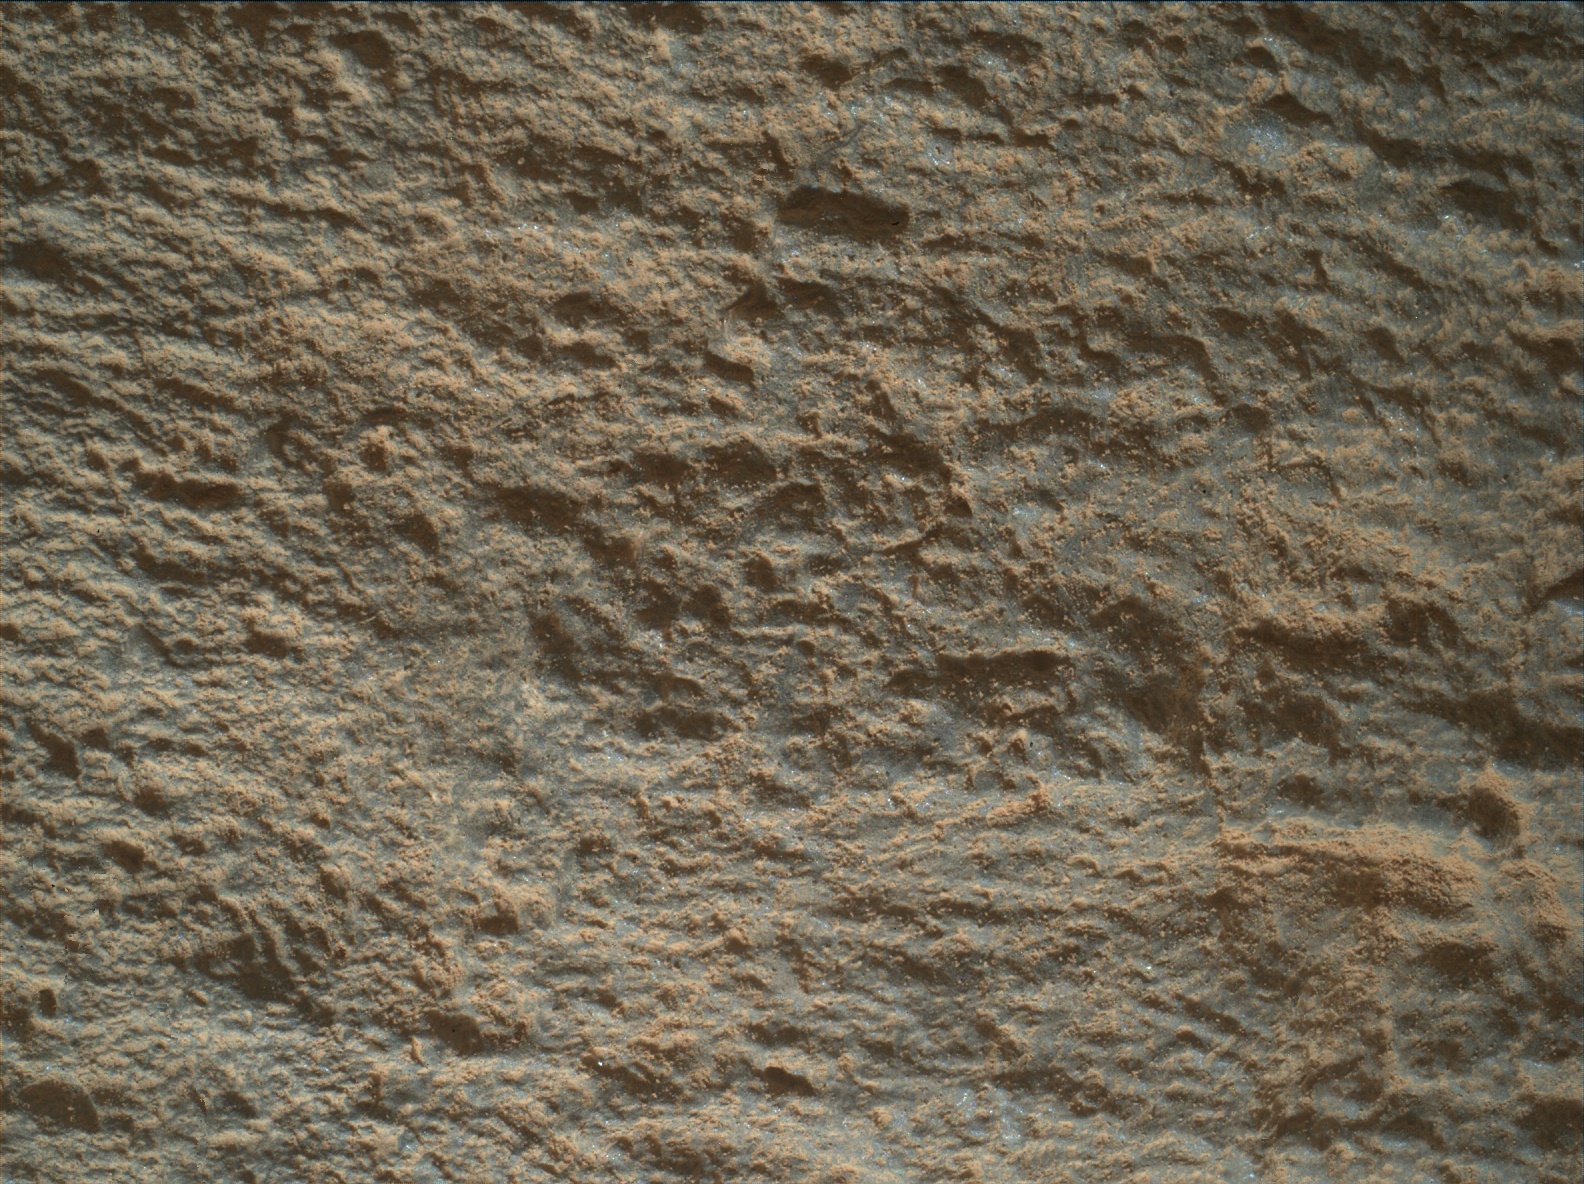 Nasa's Mars rover Curiosity acquired this image using its Mars Hand Lens Imager (MAHLI) on Sol 2700